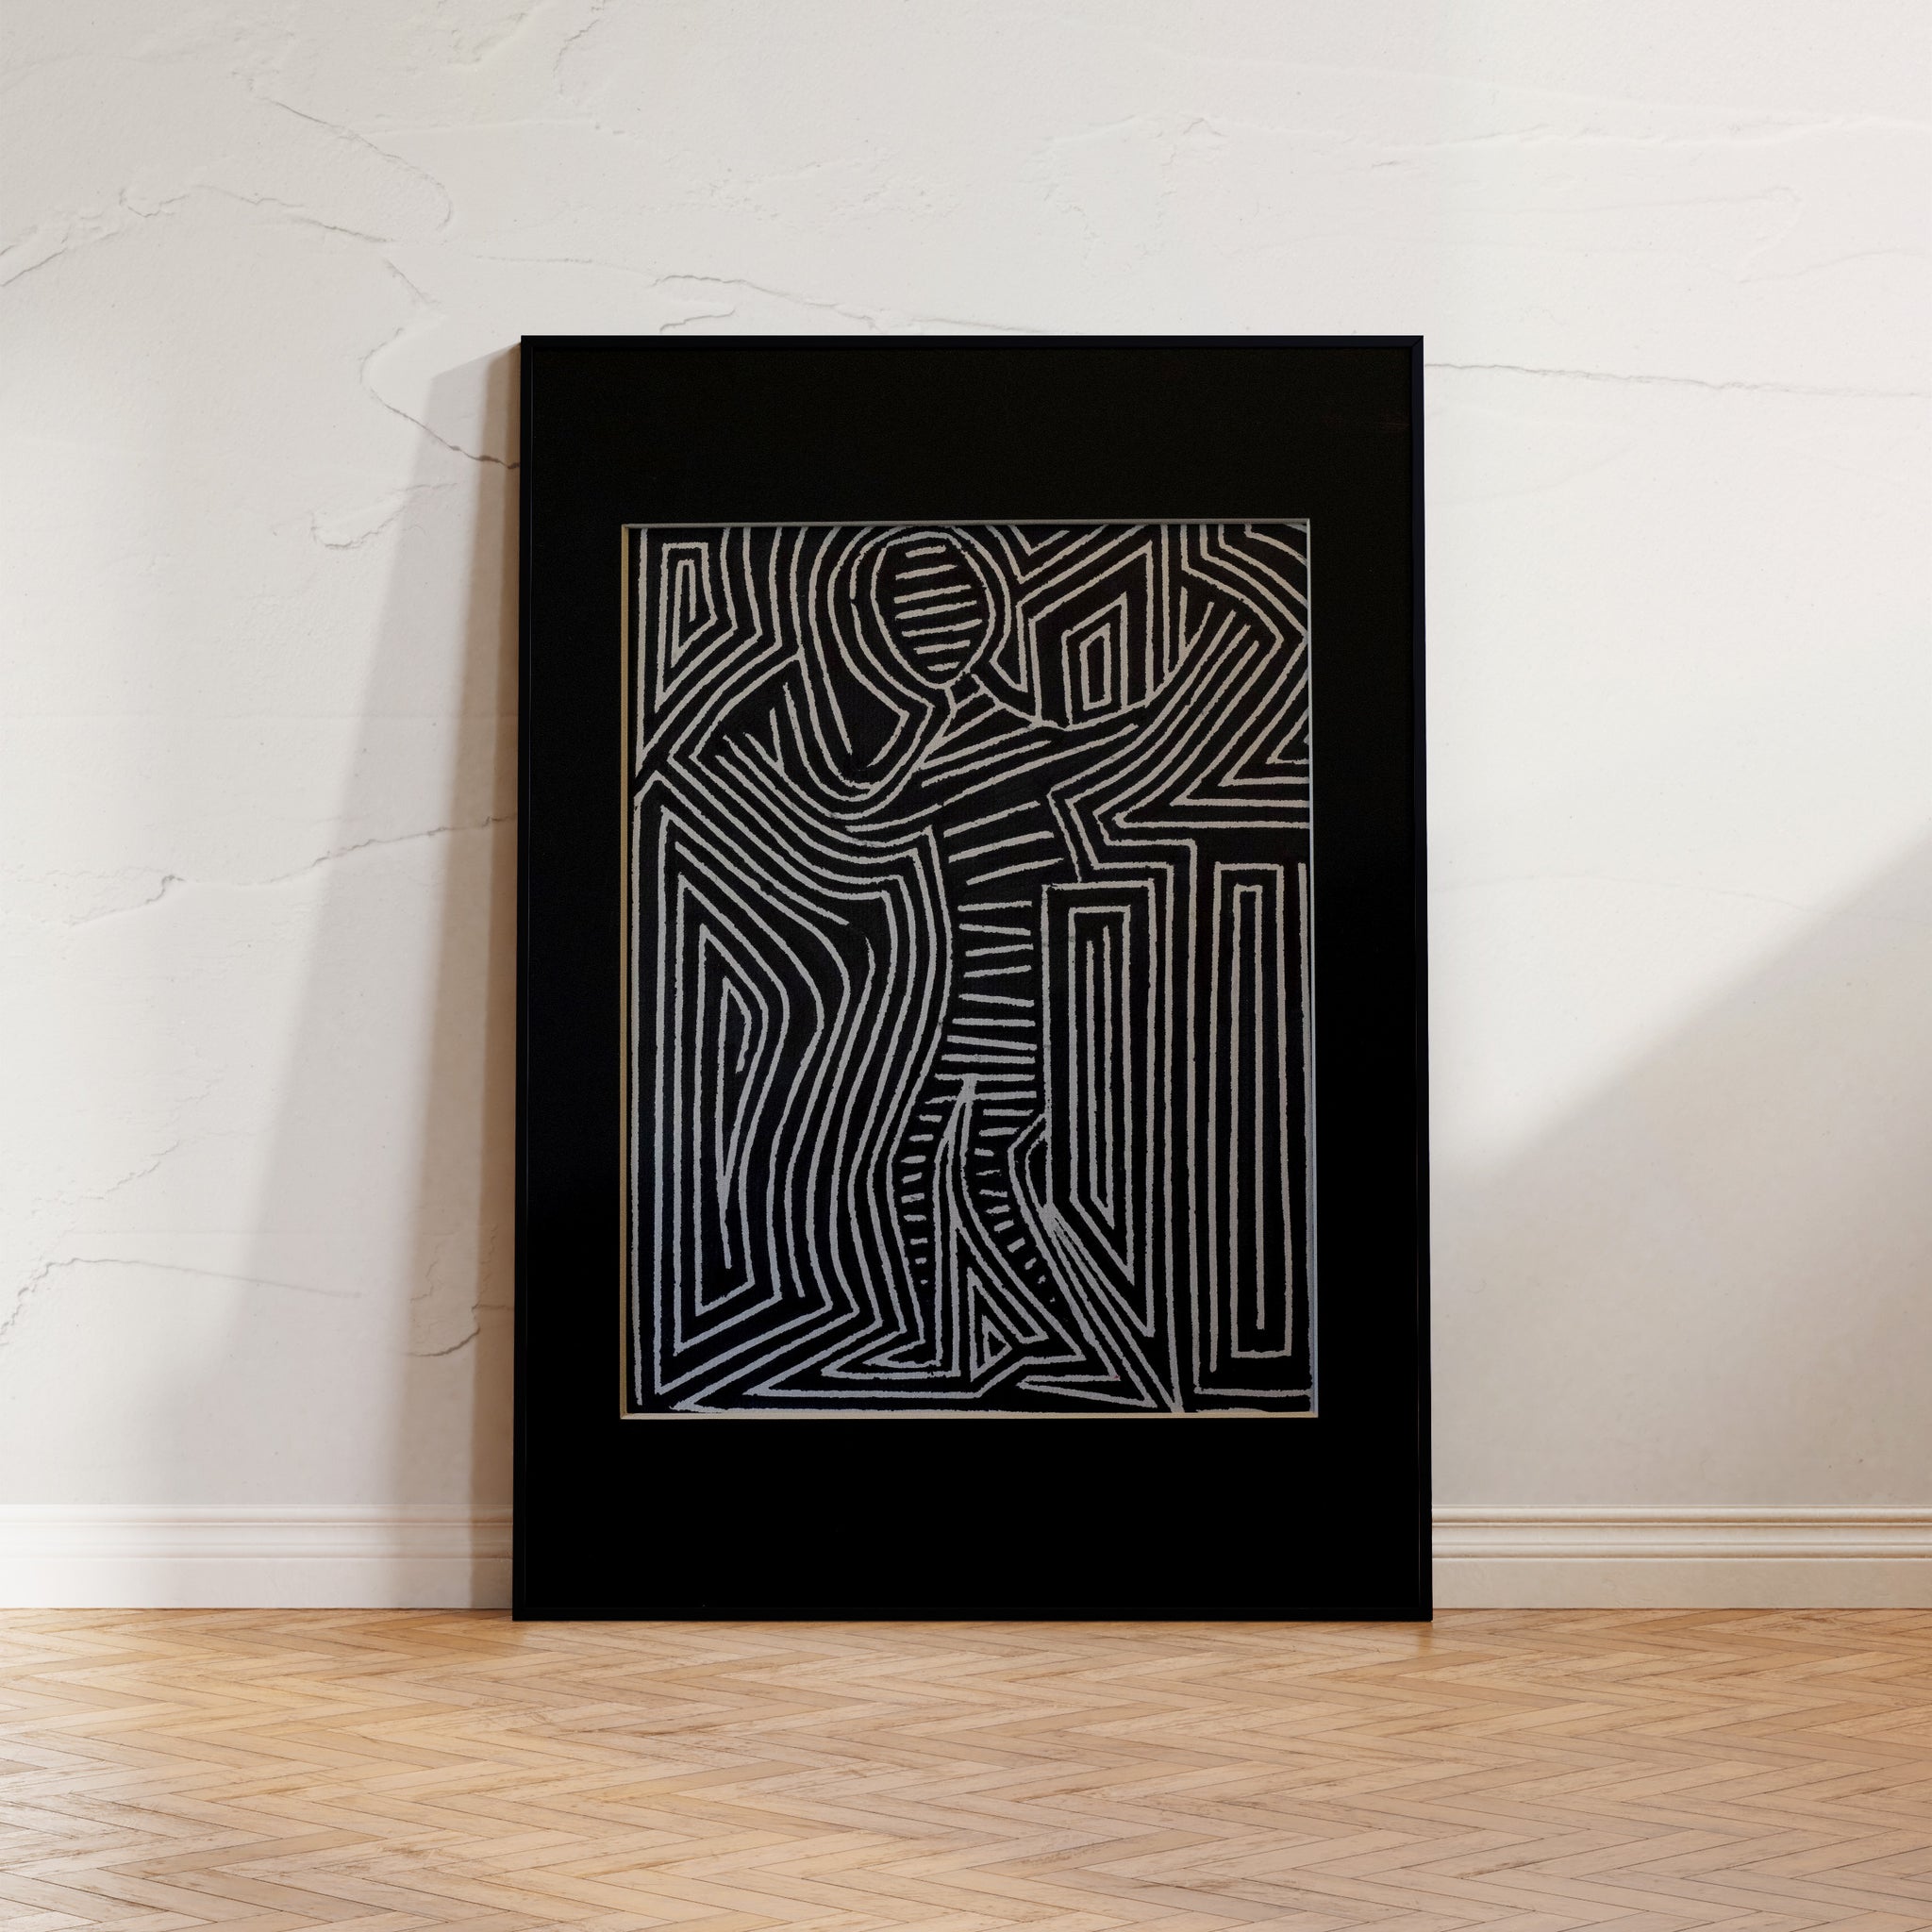 "Rhythmic Contours" - A striking black and white artwork celebrating the power and fluidity of the human form through abstraction.